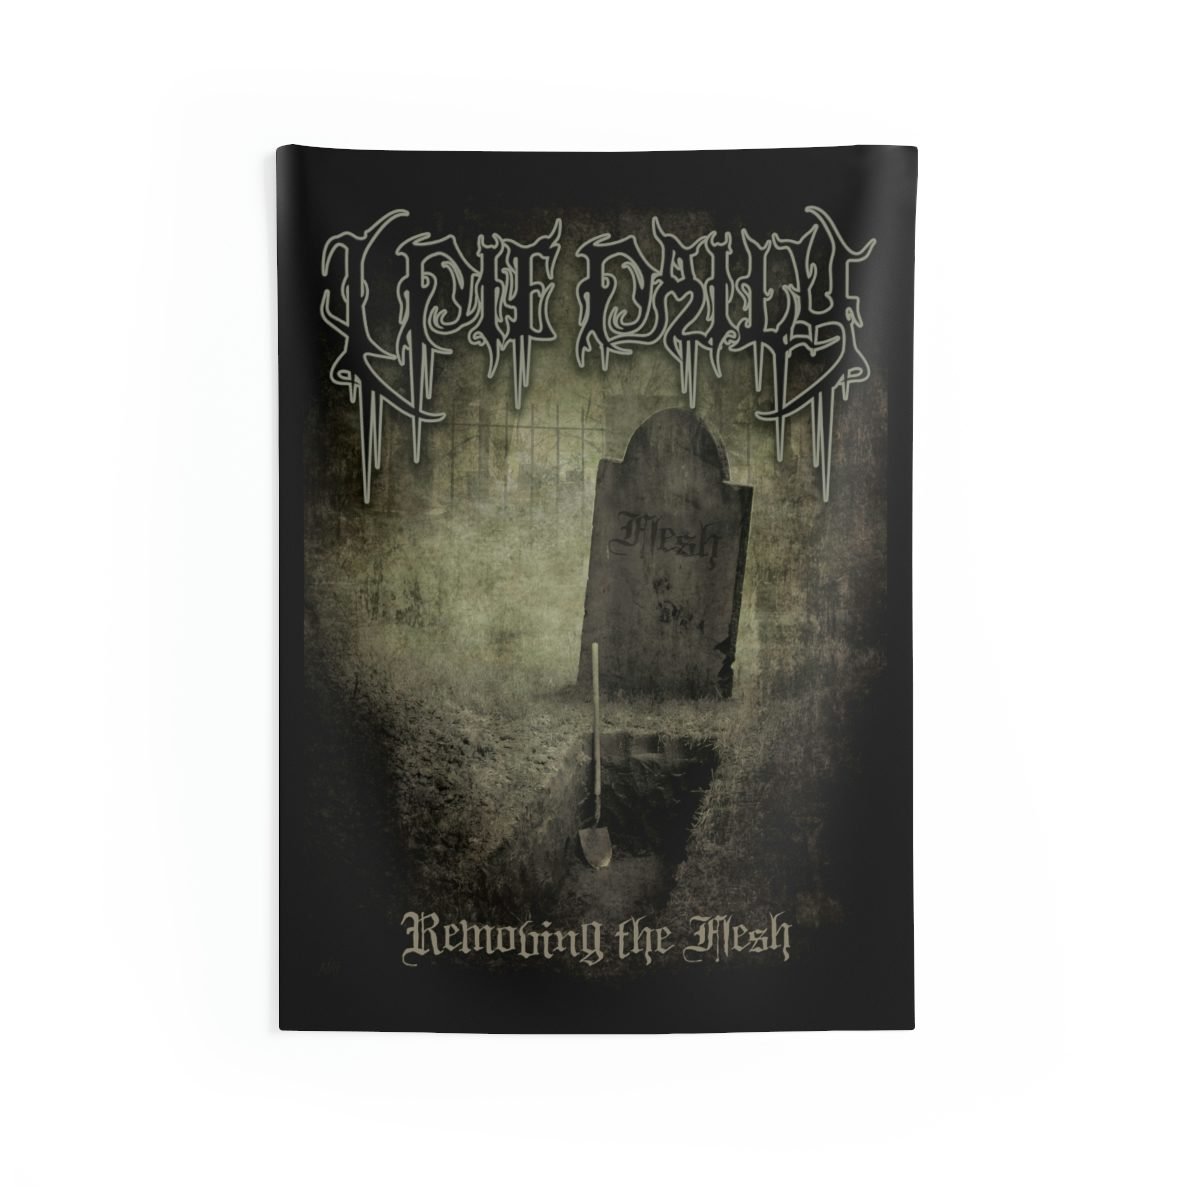 I Die Daily – Removing the Flesh Indoor Wall Tapestries